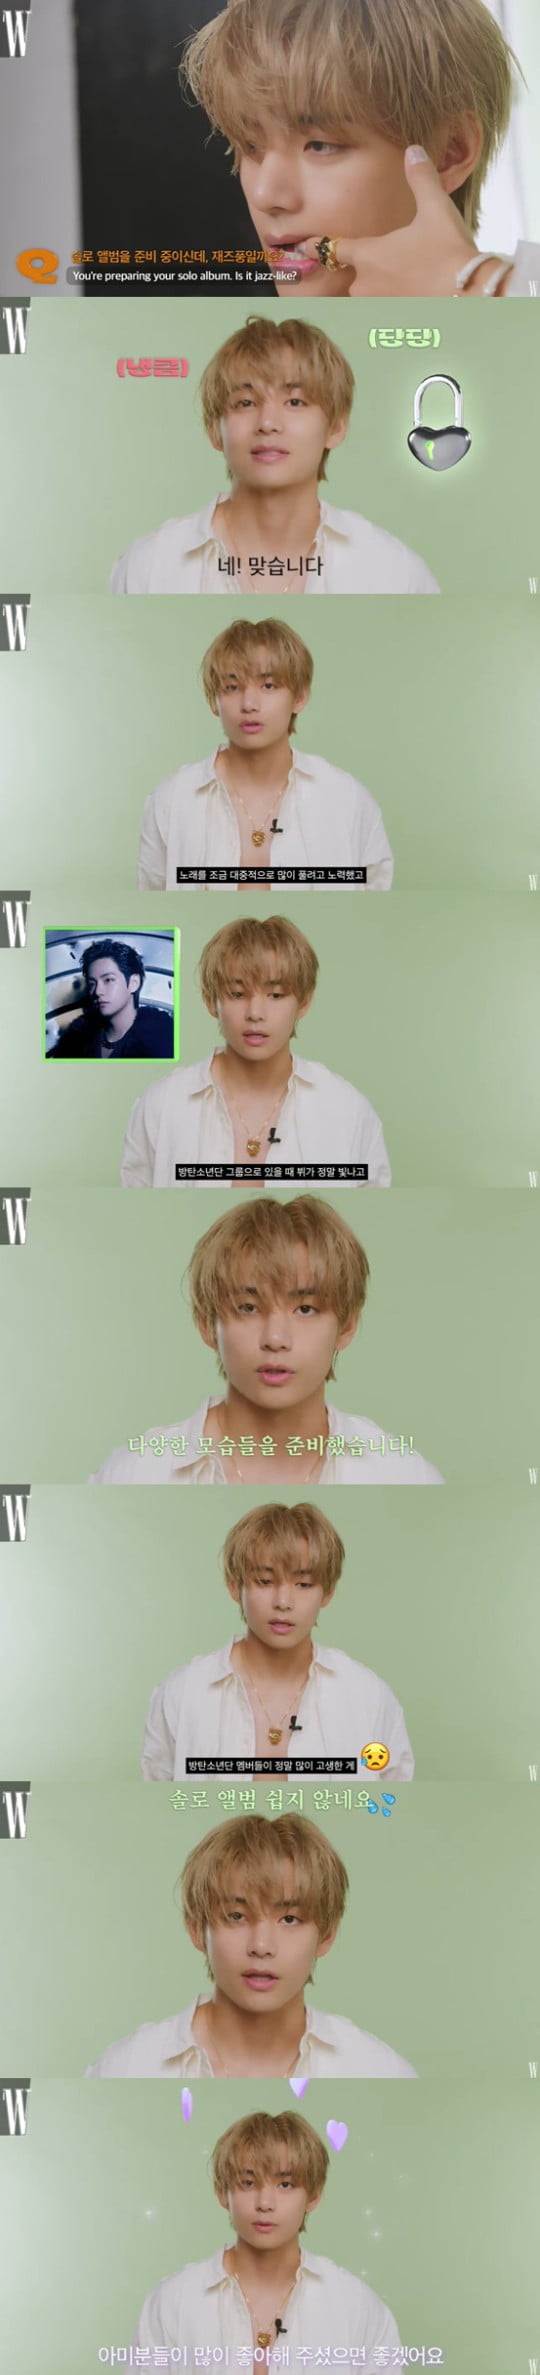 [Comprehensive] BTS V "It's not easy to debut as a solo...I understand the members' difficulties"